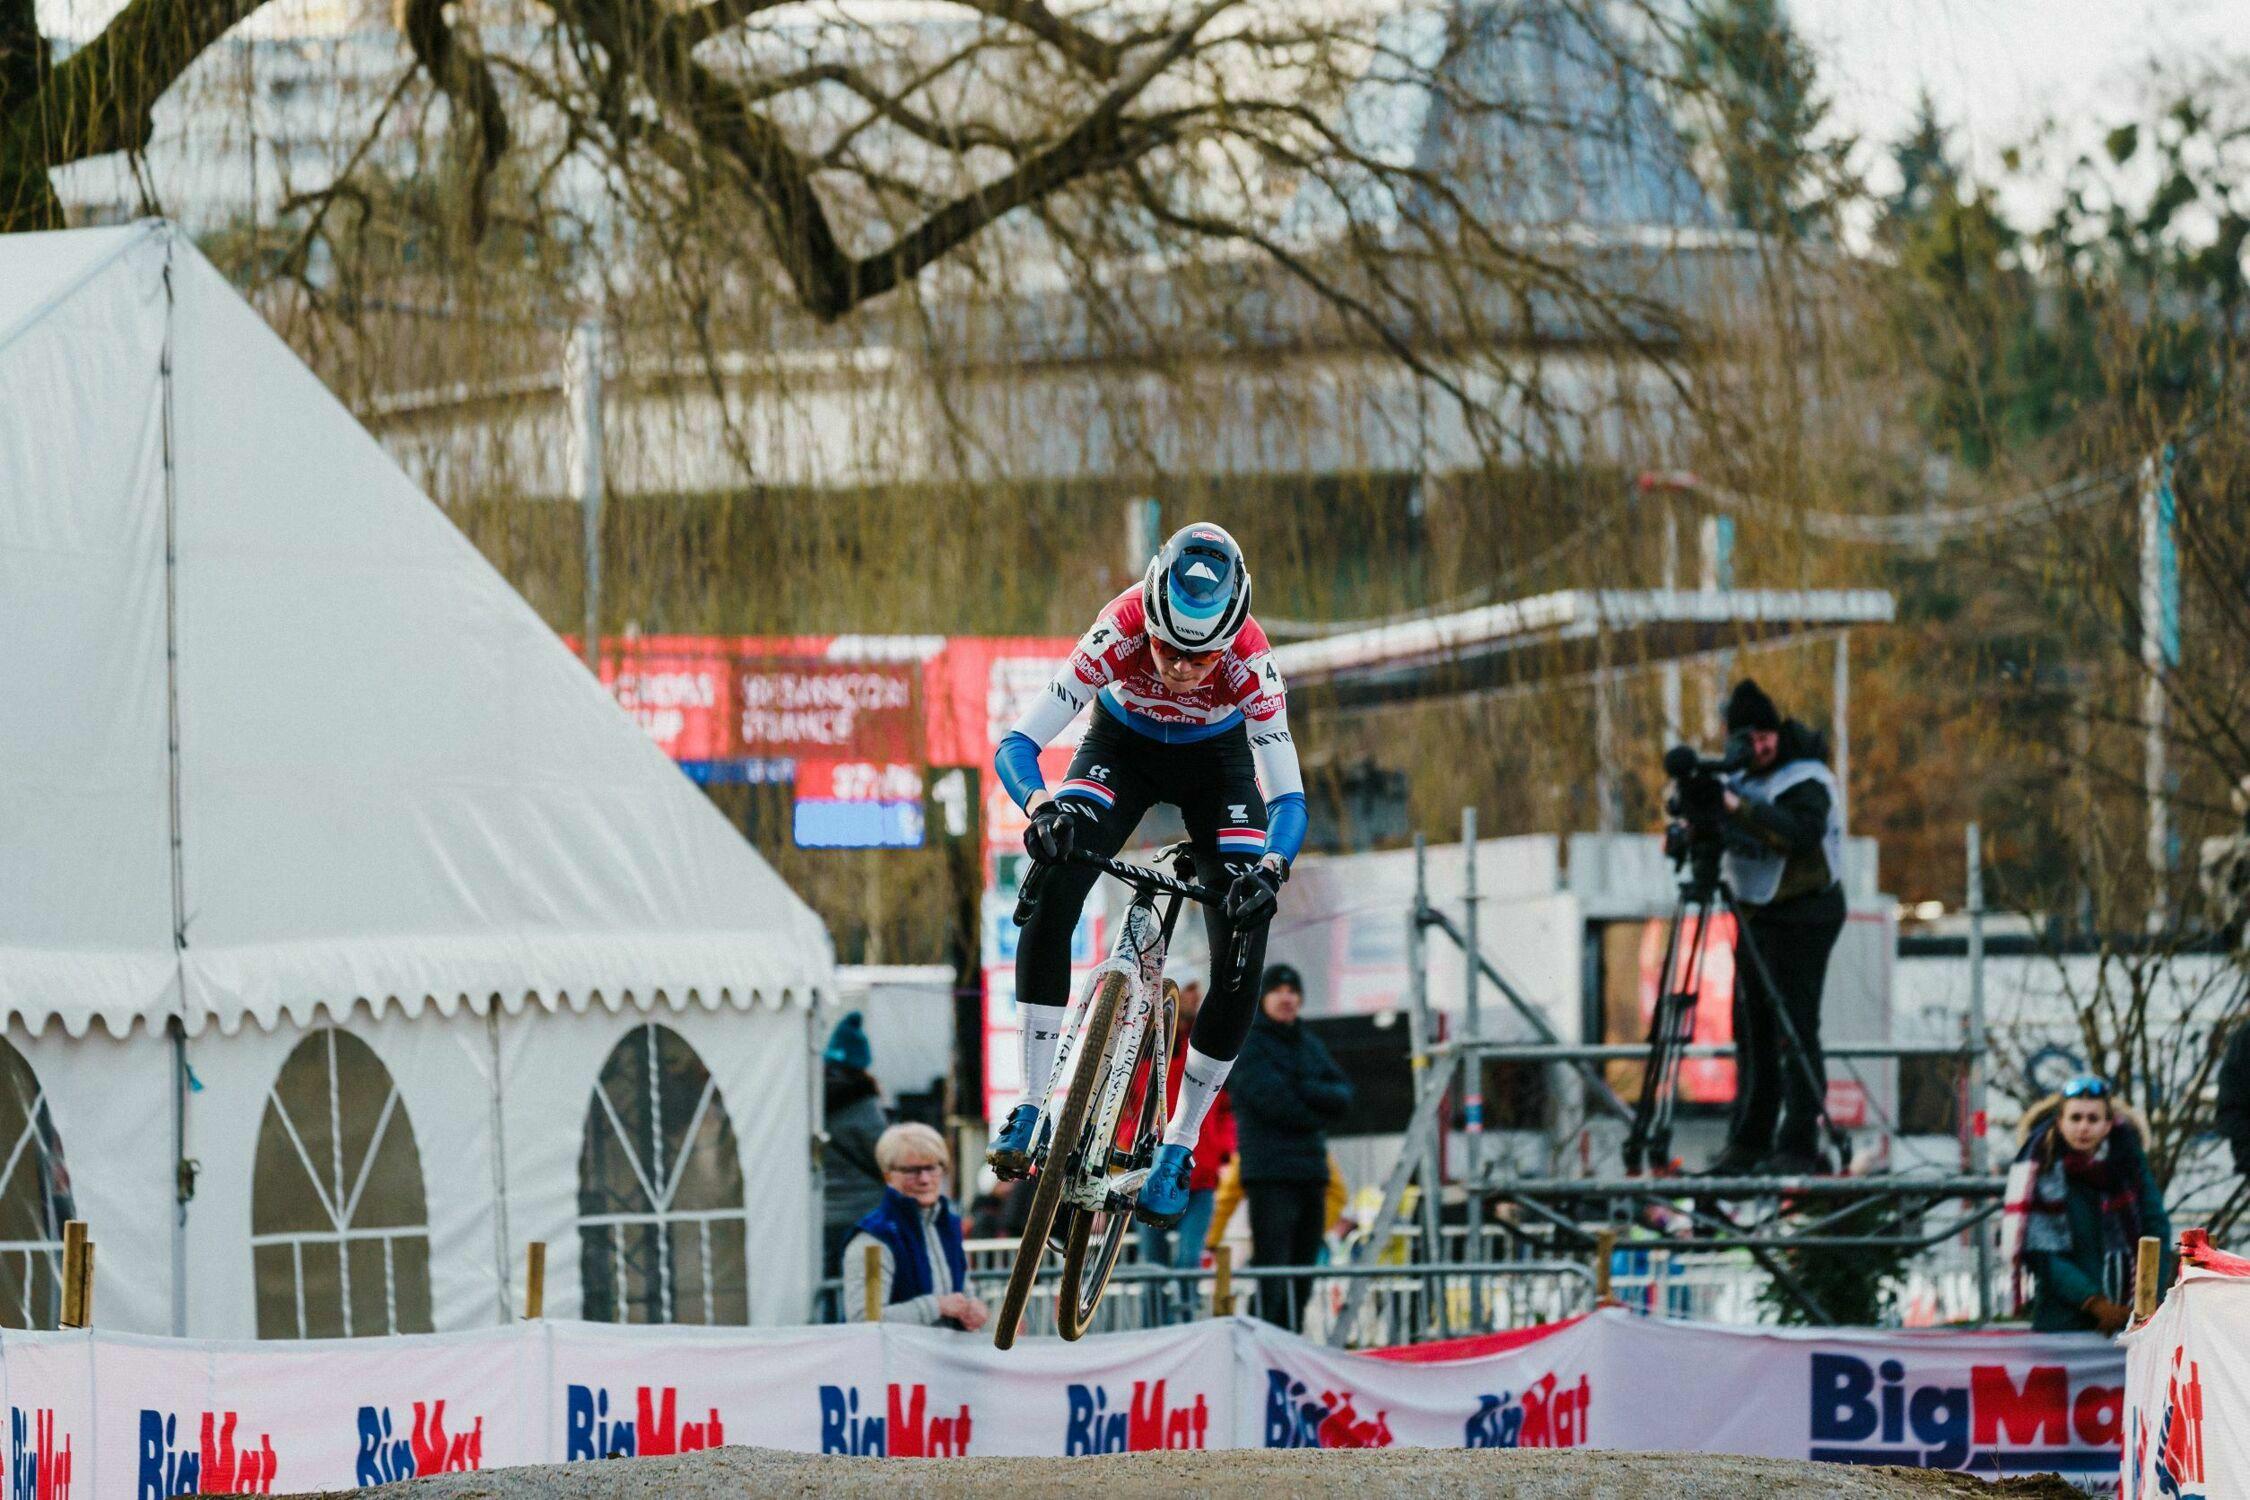 Mechanical problems don’t keep Pieterse from winning in Besançon